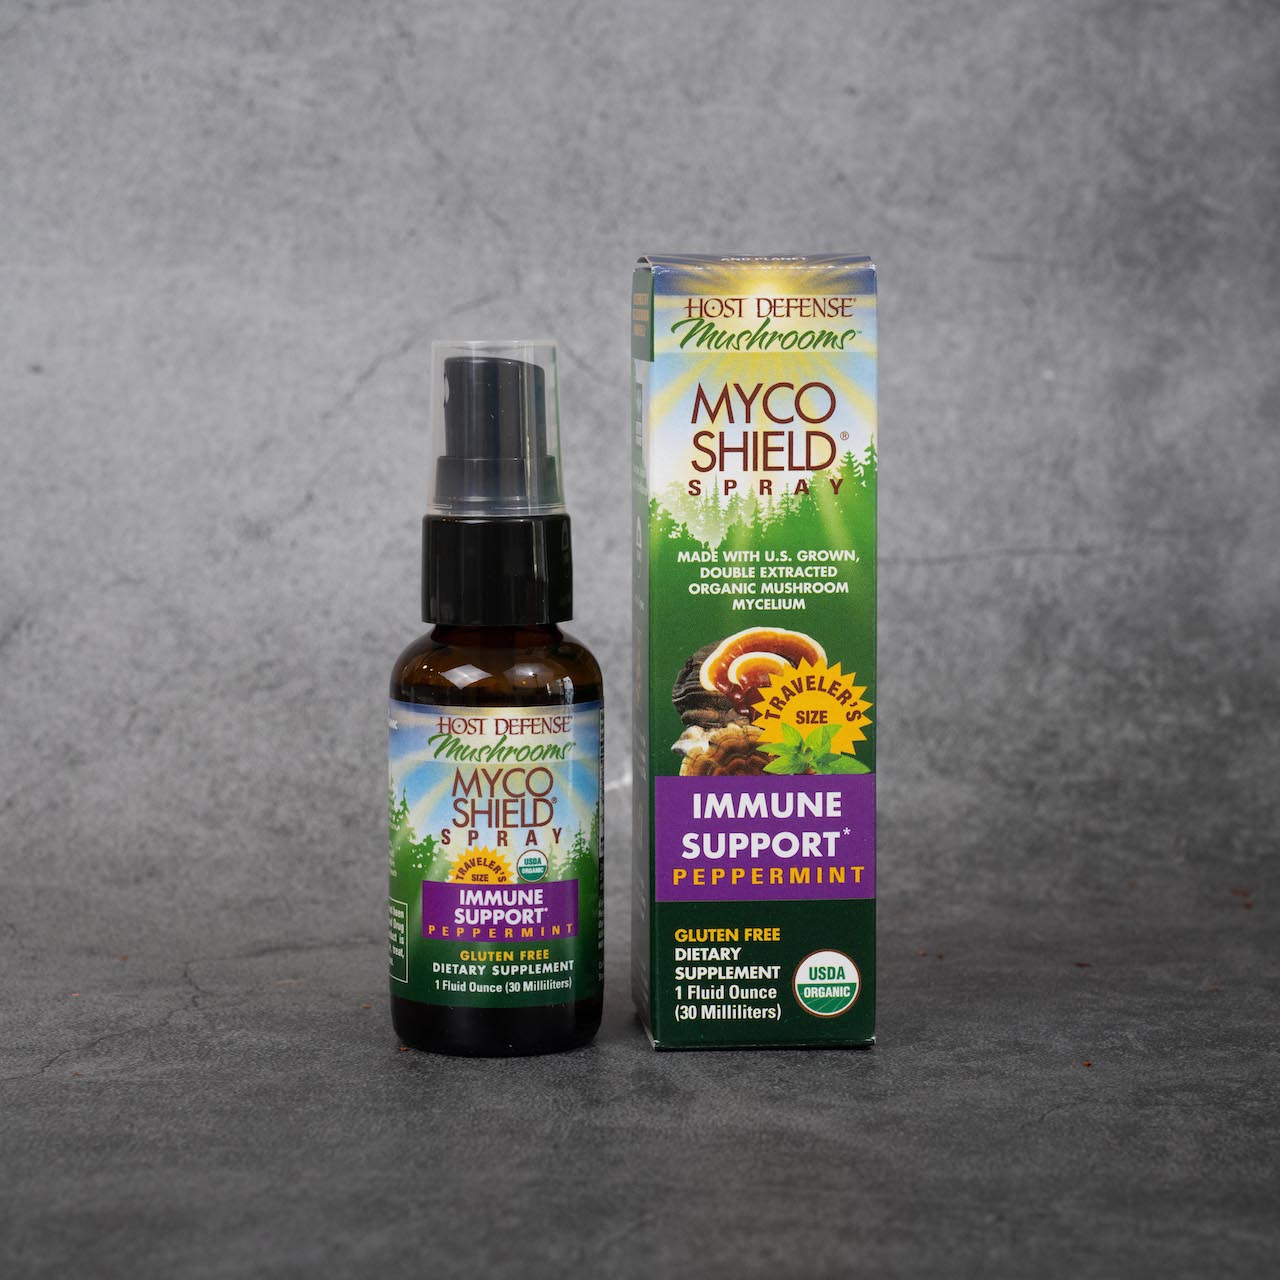 On the left, a small spray bottle. The label on the bottle has a drawing of trees and a sunny sky, and reads "Host Defense Mushrooms, Myco Shield Spray, Traveler's Size, Immune Support Peppermint, Gluten Free Dietary Supplement, 1fl oz, 30ml". It has a USDA organic certification label. On the right, the box for the product. It has the same background drawing, plus illustrations of mushrooms. It has the same text as the bottle, plus white text reading "Made with U.S. grown, double extracted organic mushroom 